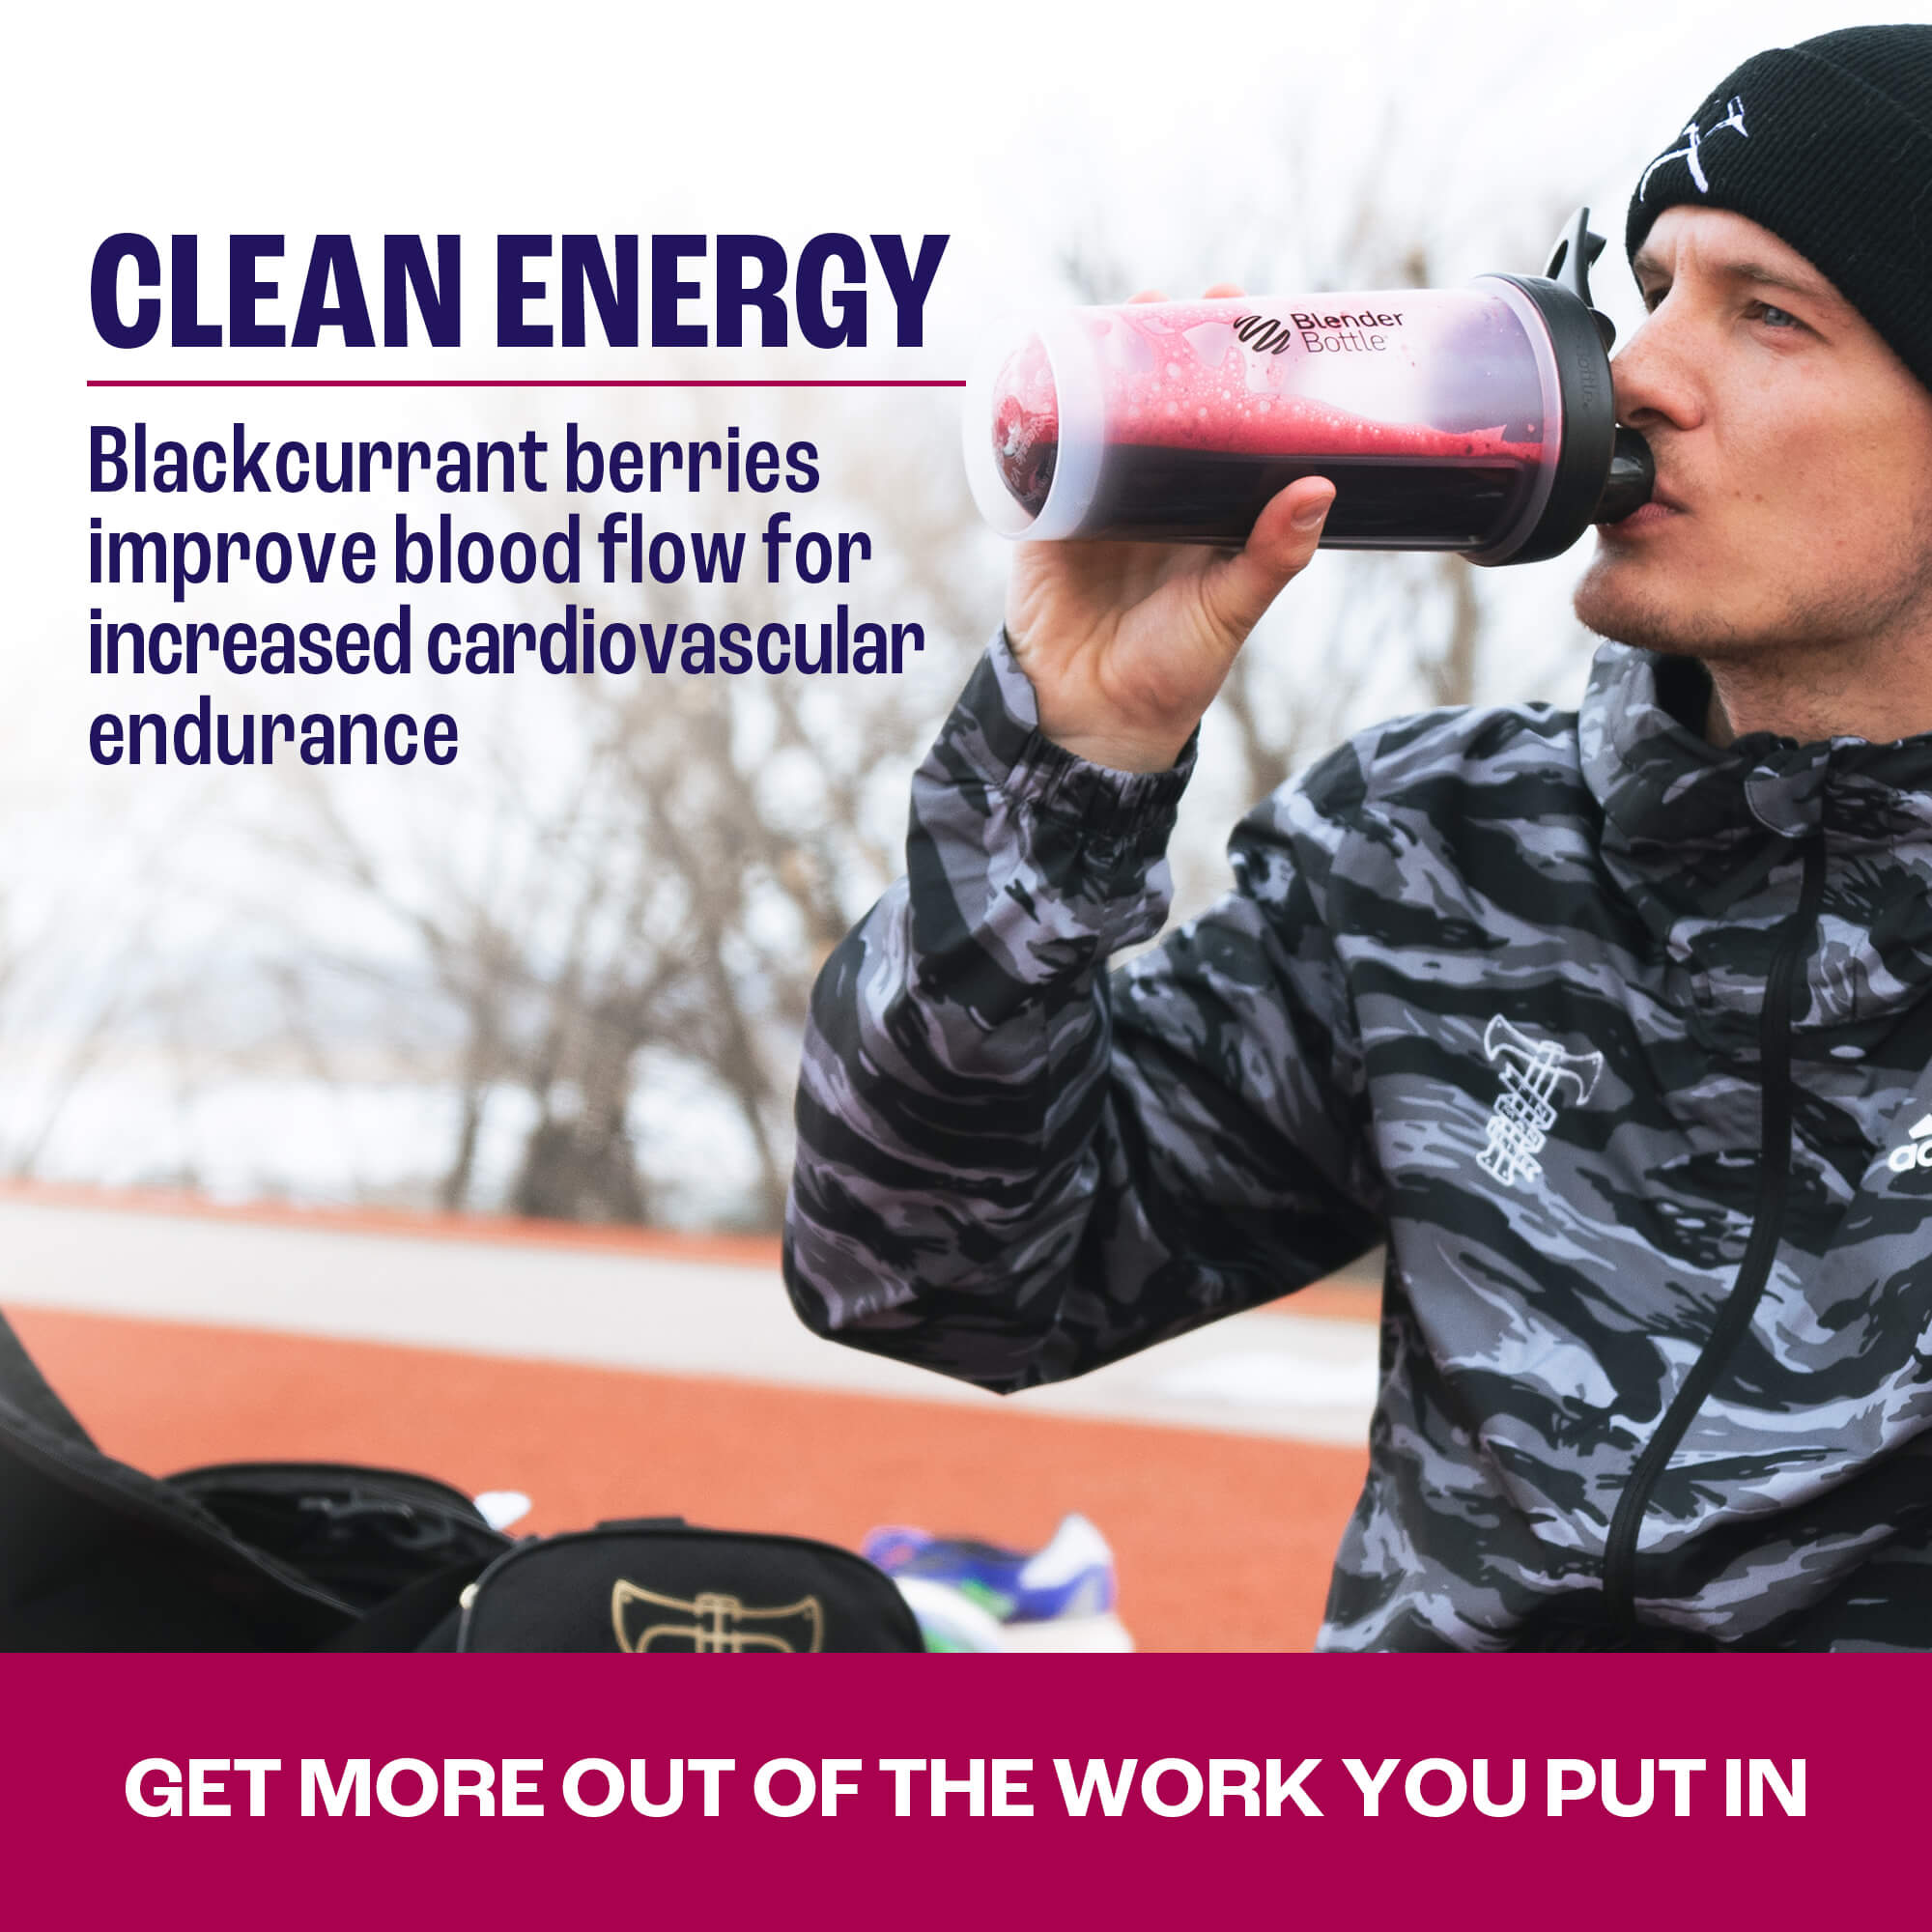 Blackcurrant berries provide clean energy to improve blood flow and boost cardio exercise